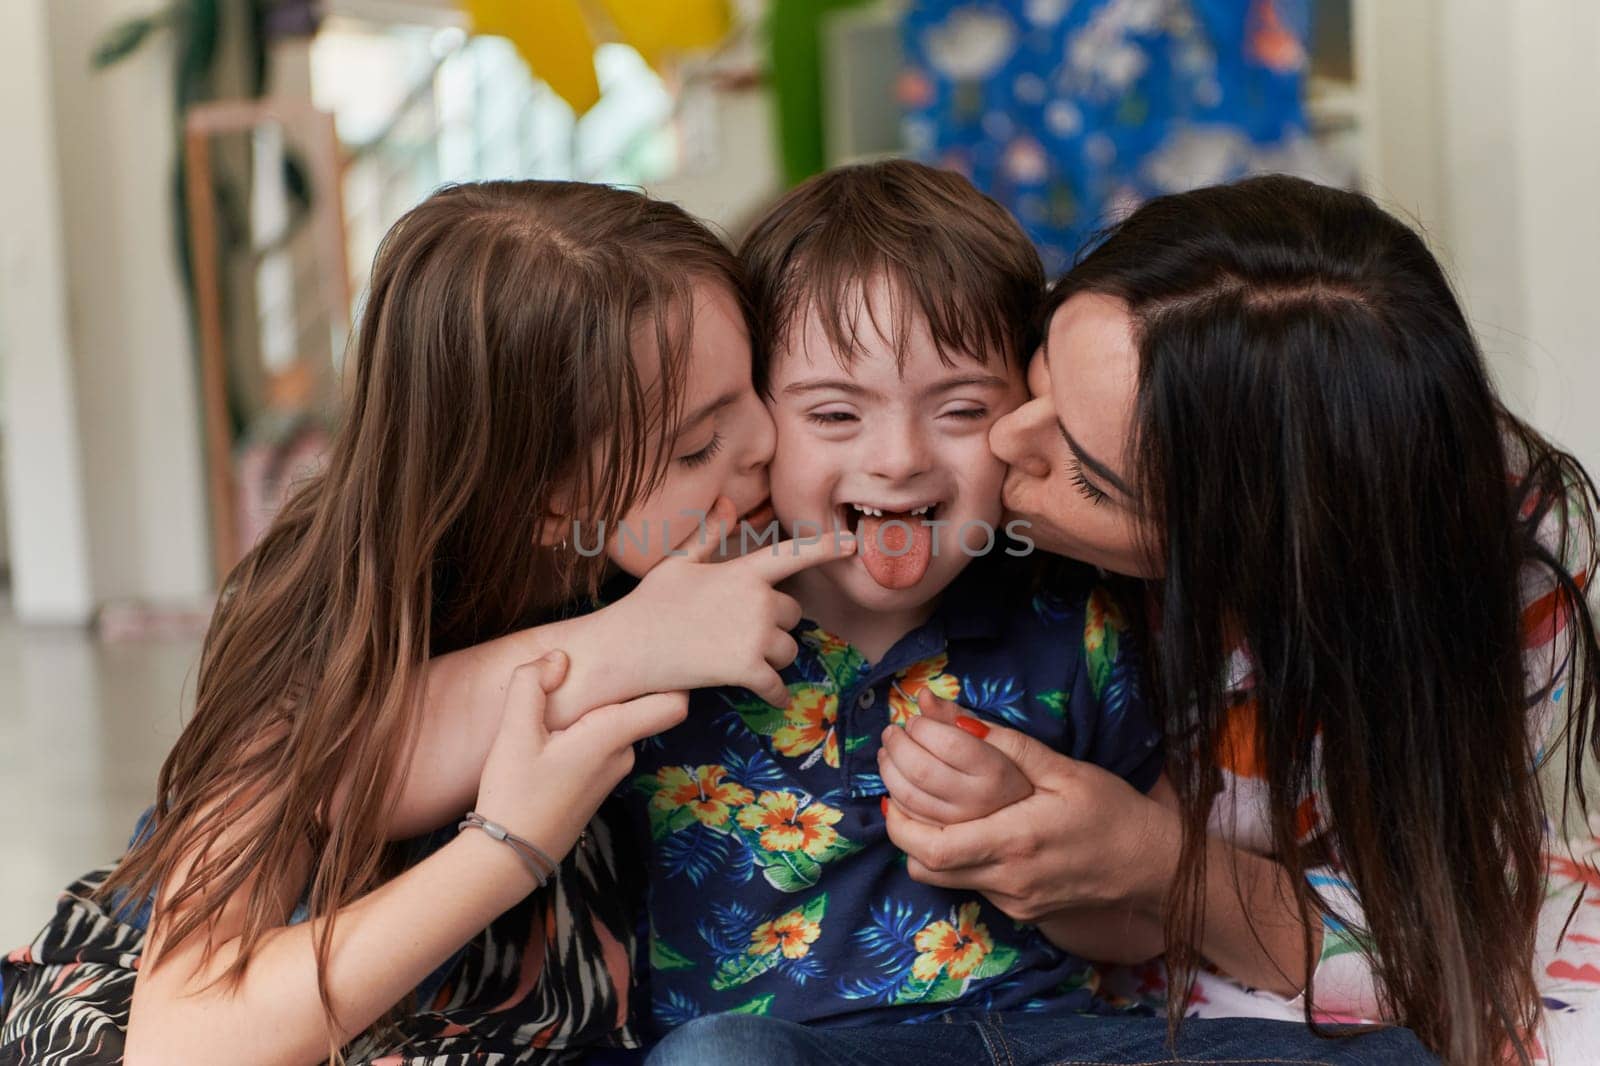 A girl and a woman hug a child with down syndrome in a modern preschool institution by dotshock